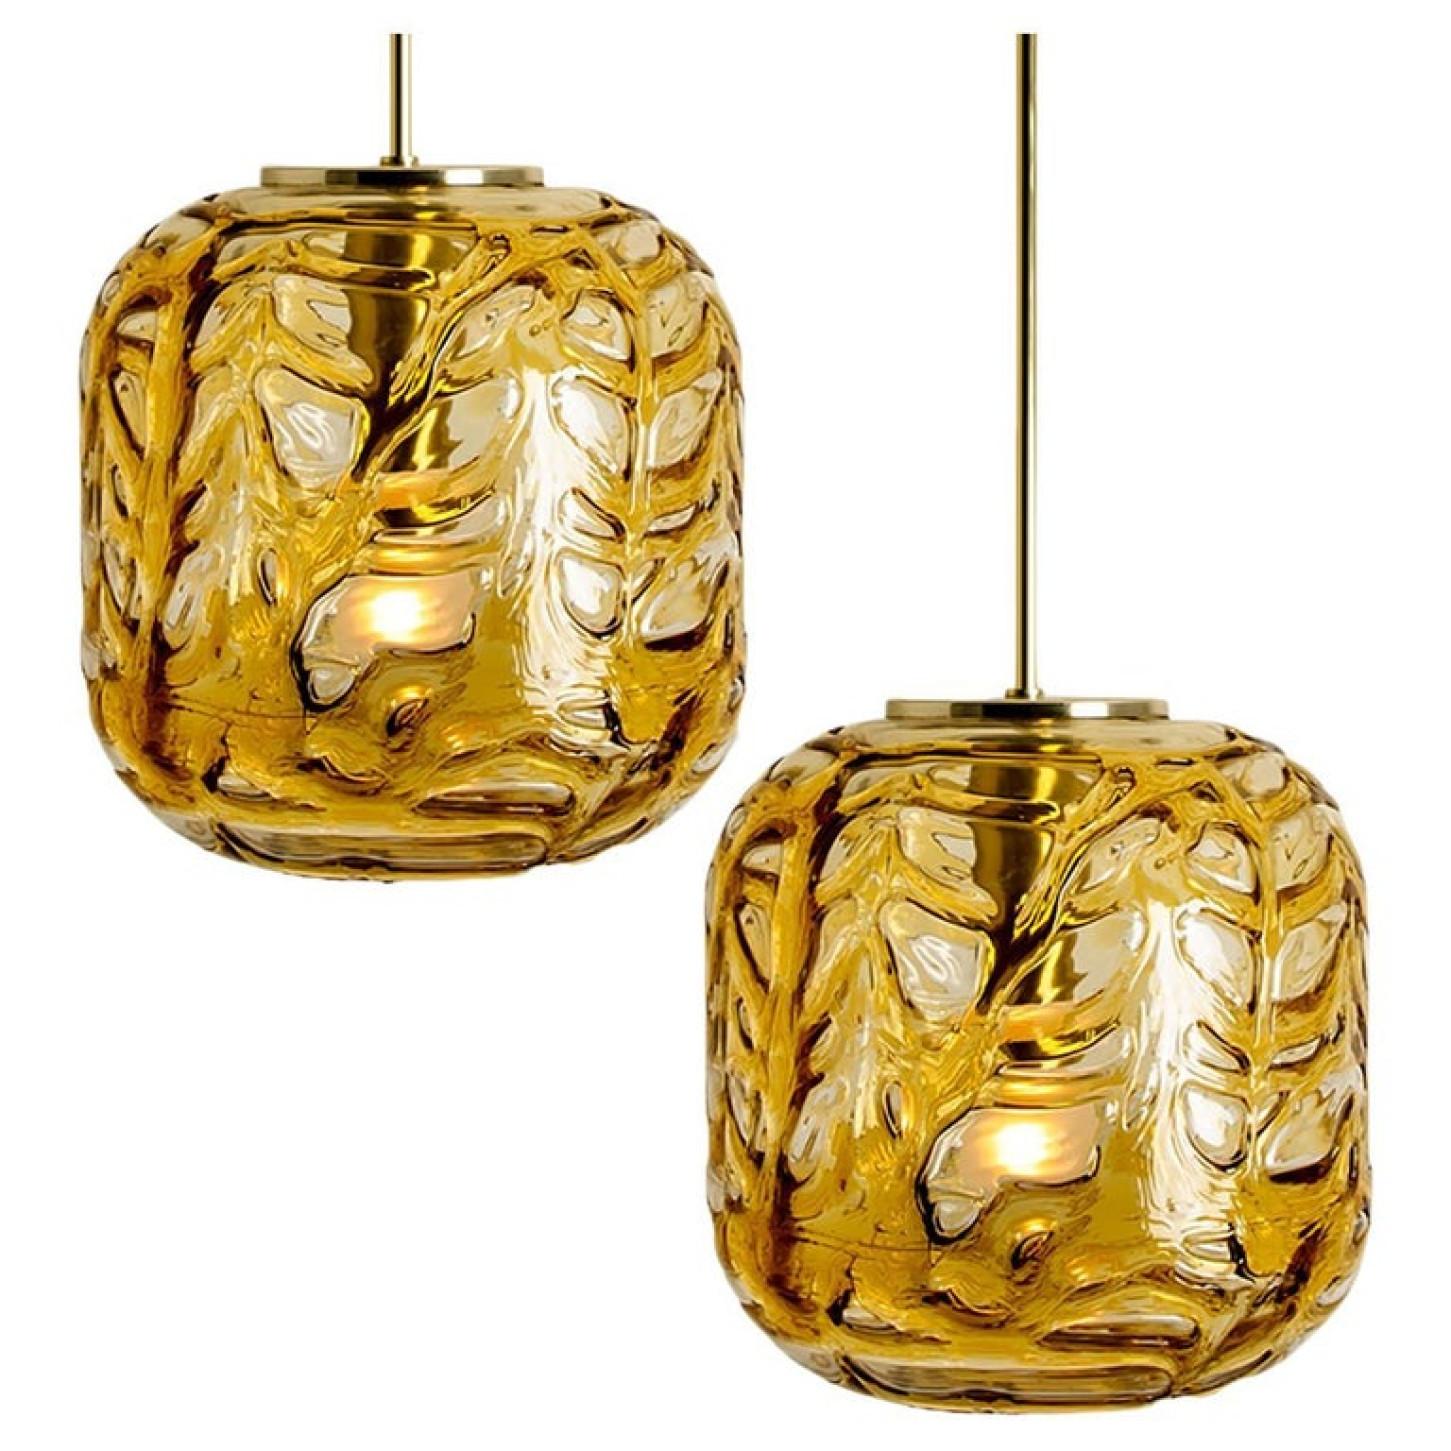 Pair of high-end XL Murano pendant lights in the style of Venini, manufactured circa 1960. Real statement pieces. Heavy quality thick Murano crystal glass shade made out of overlay glasses of clear, light amber and dark amber applied in irregular